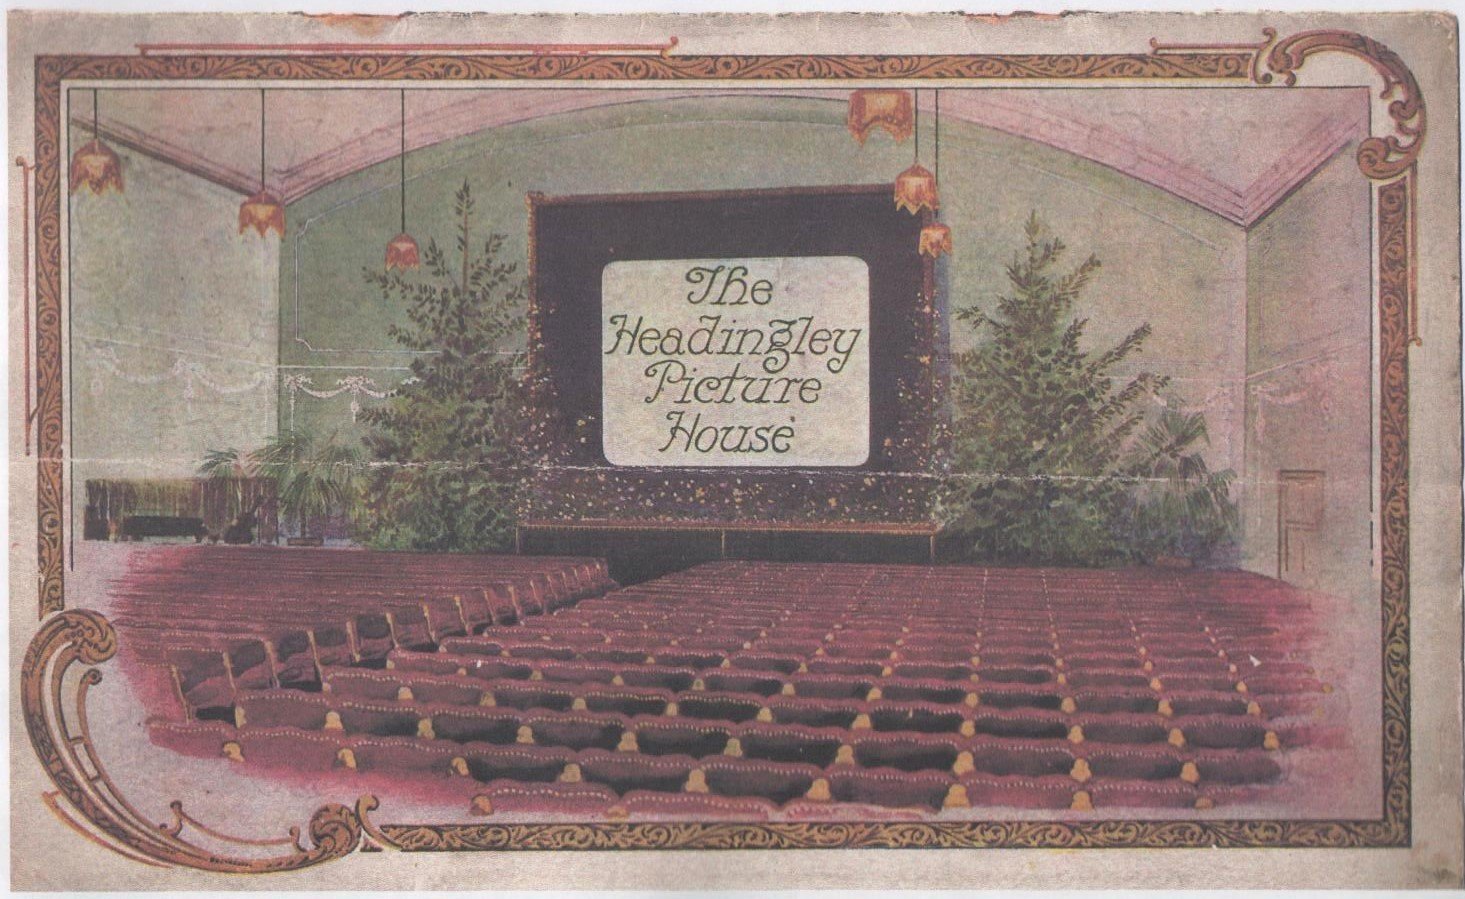 Flyer, Headingley Picture House